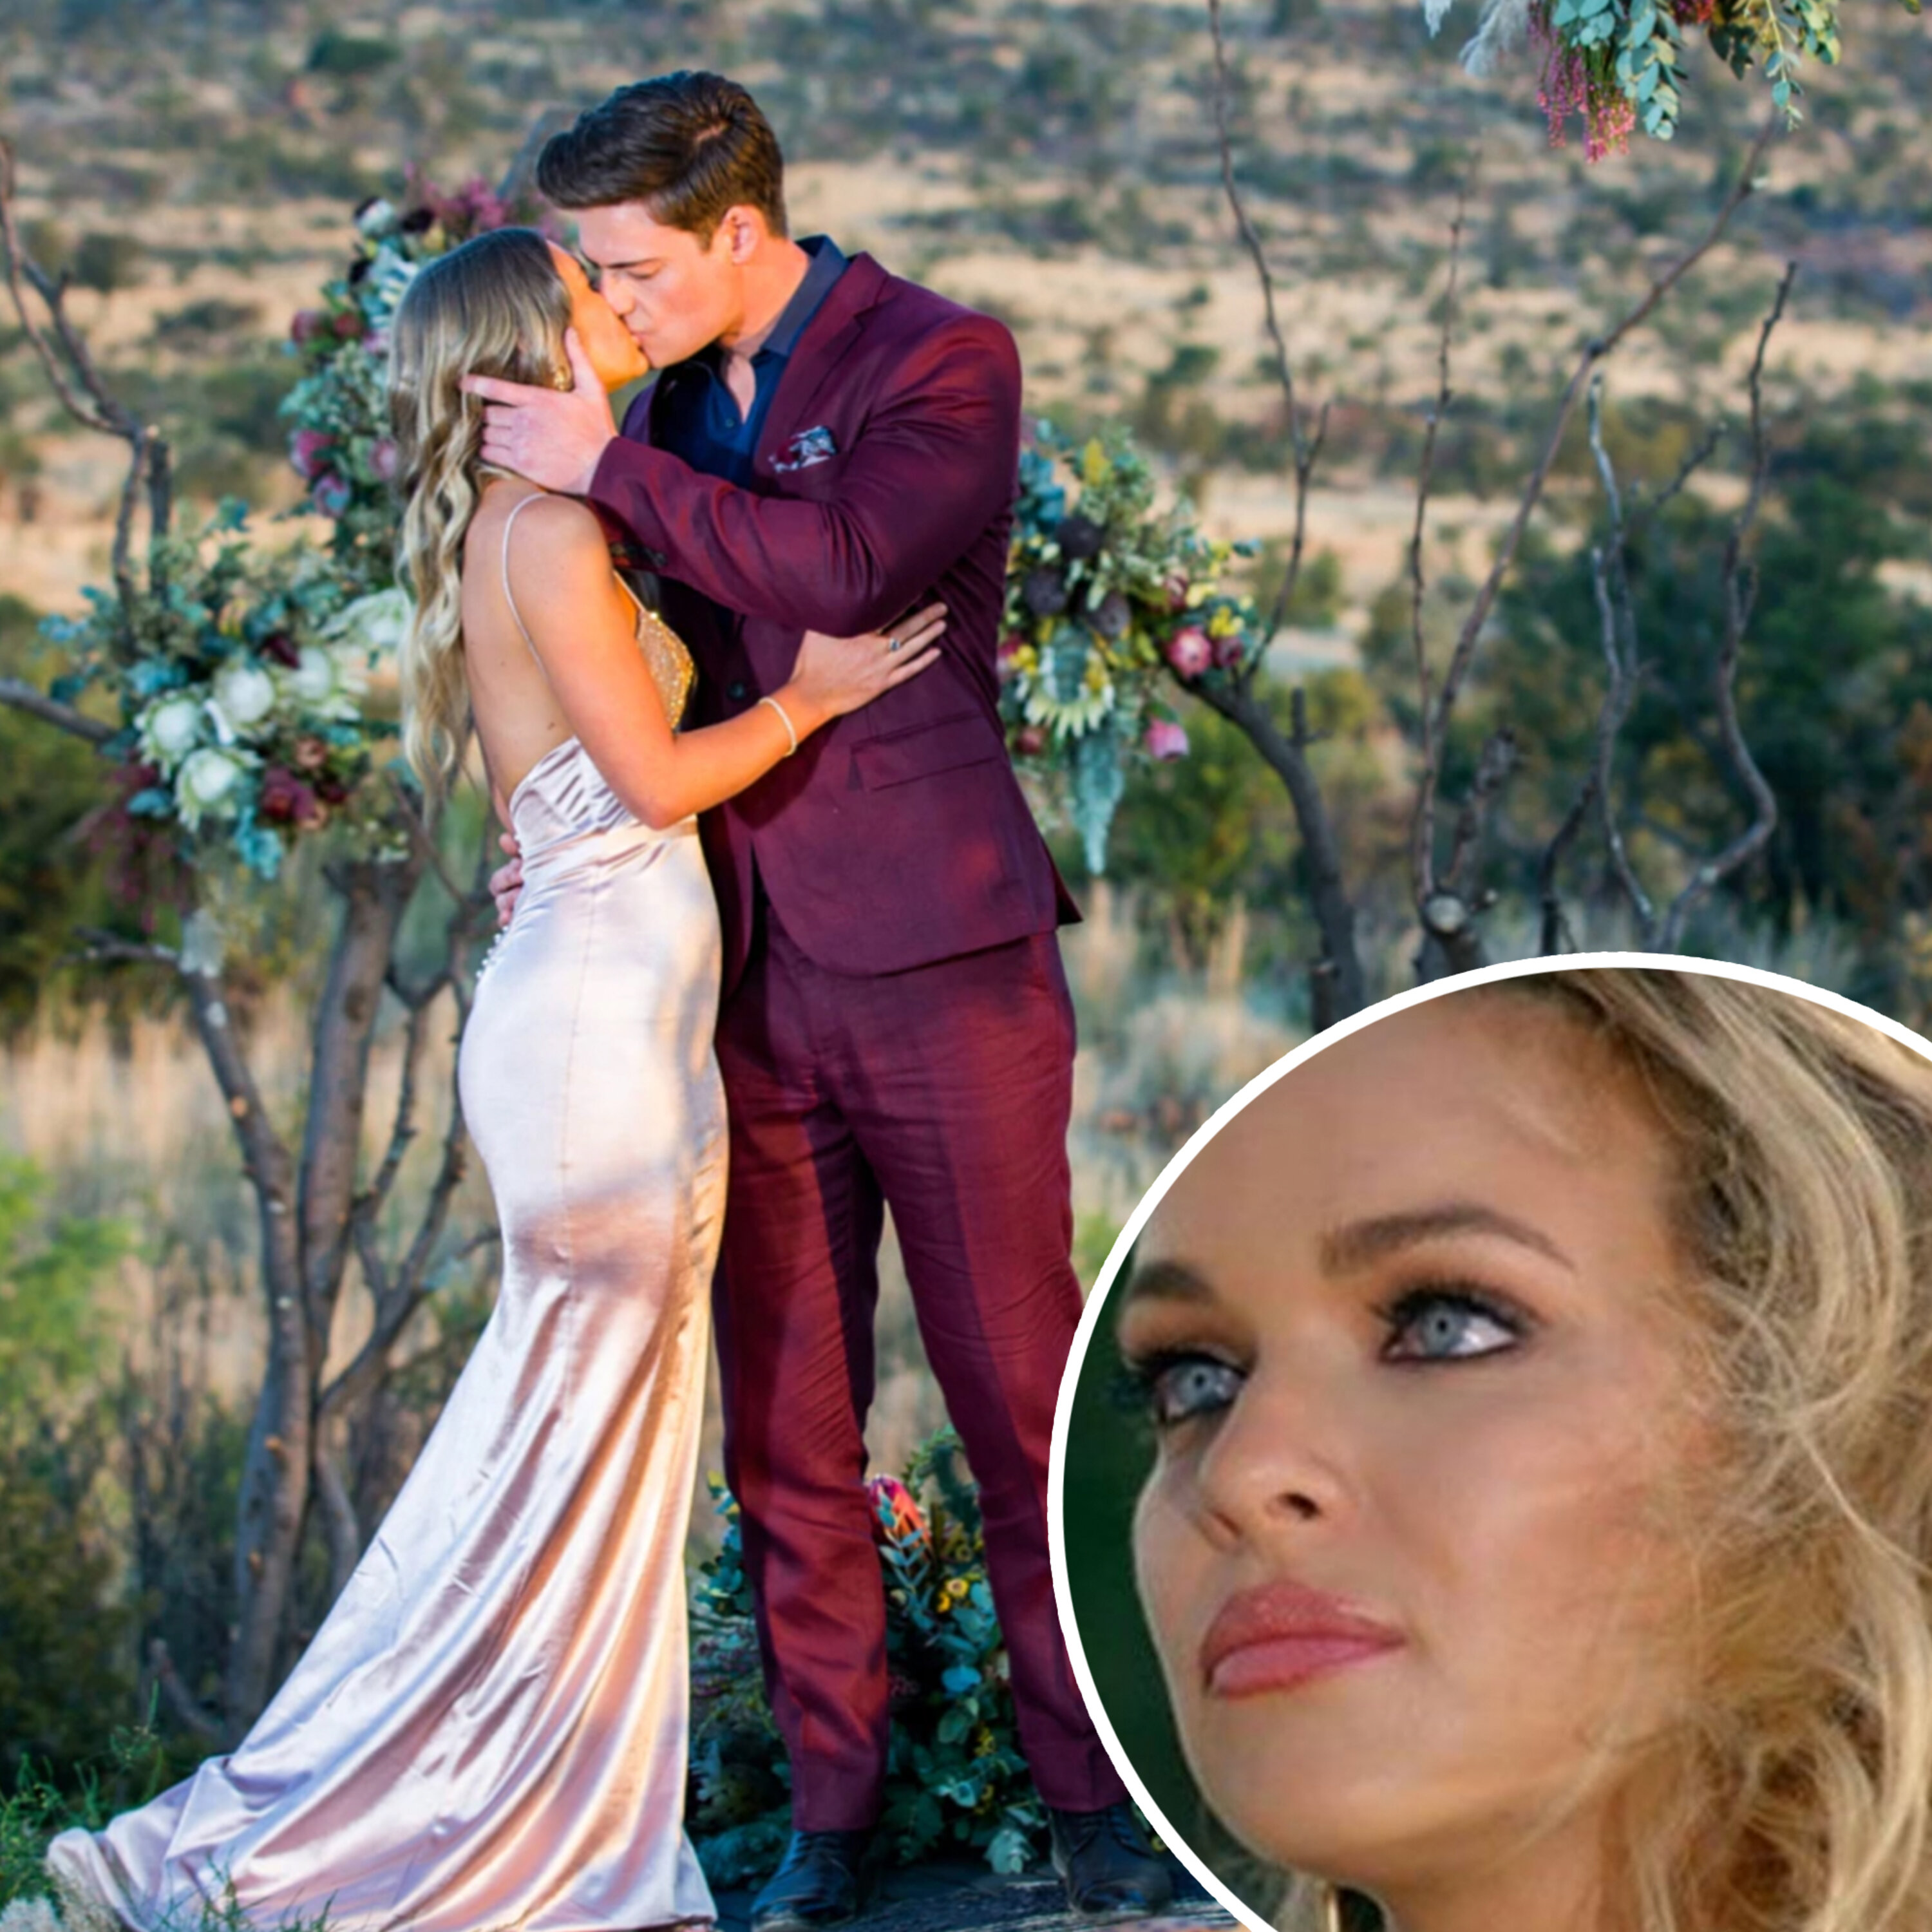 We Are Still Crying Over The Bachelor Finale's Hot Nerdy Fairytale Ending